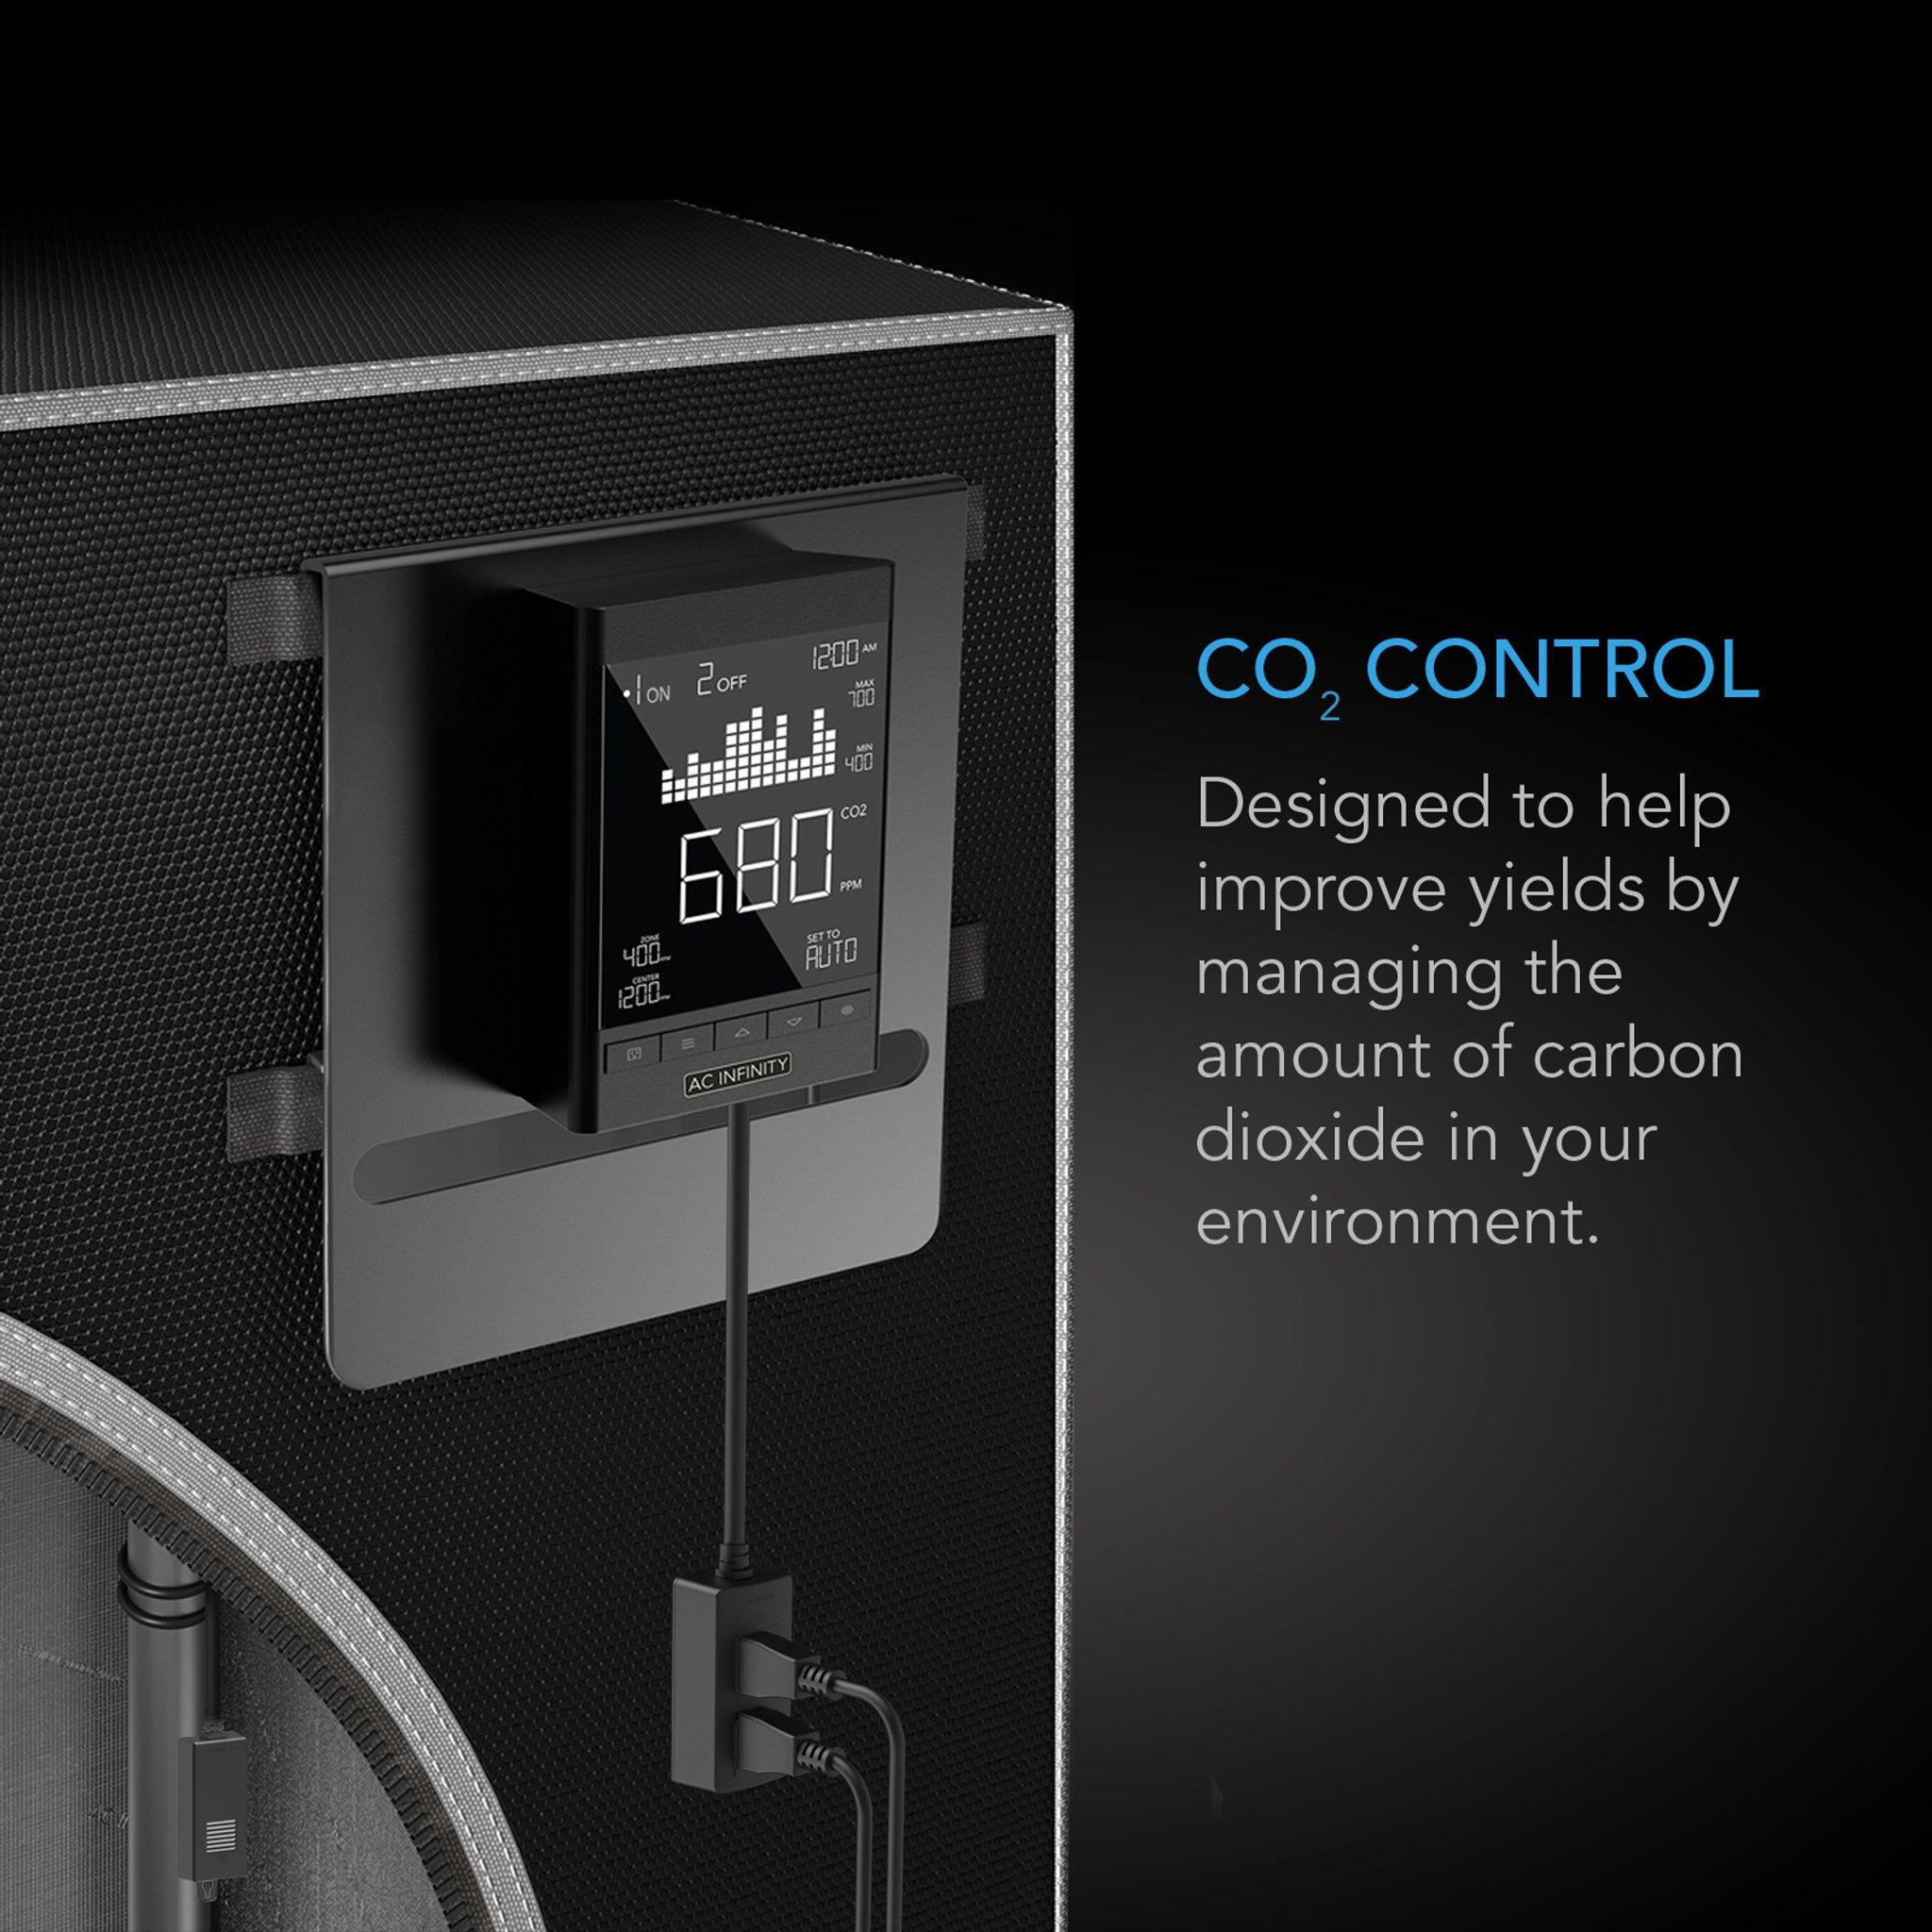 Product Secondary Image:AC INFINITY CO2 CONTROLLER, SMART OUTLET CARBON DIOXIDE MONITOR FOR CO2 REGULATORS AND INLINE FANS